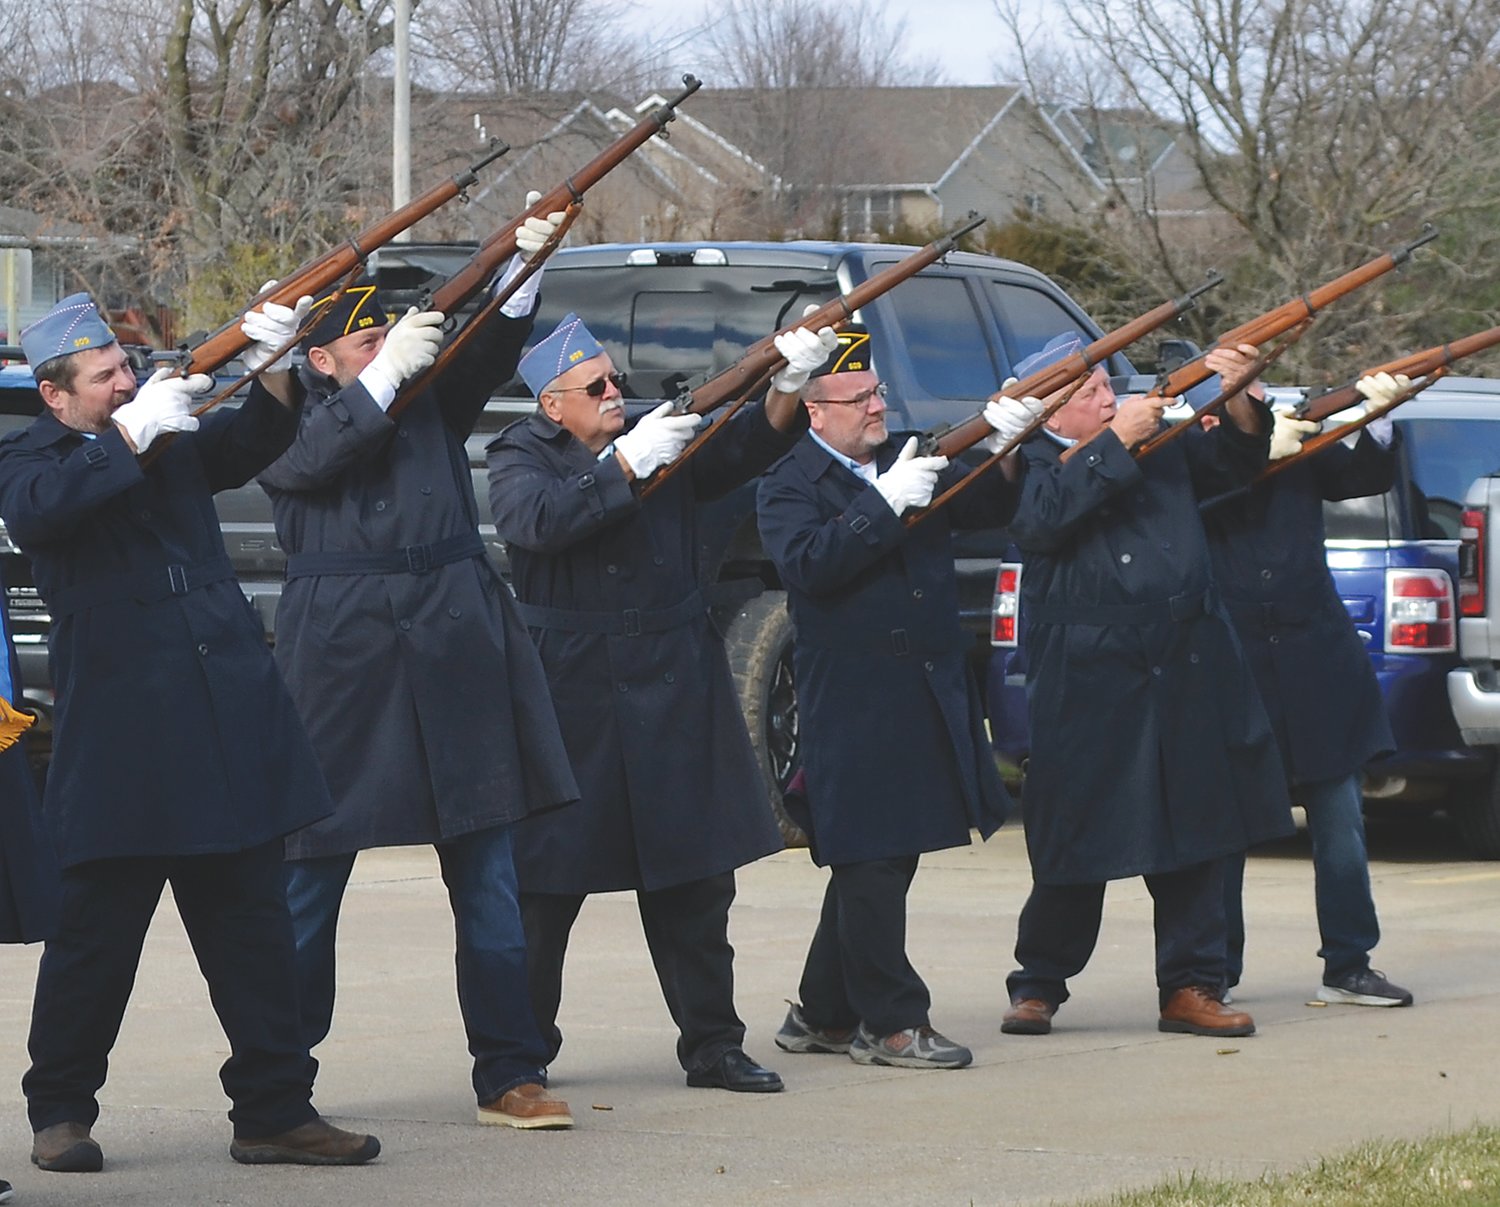 Members from the Mansell L. Philips American Legion Post 509 did a gun salute outside the West Liberty Community Center Friday, Nov. 11, as part of the Veterans Day program.